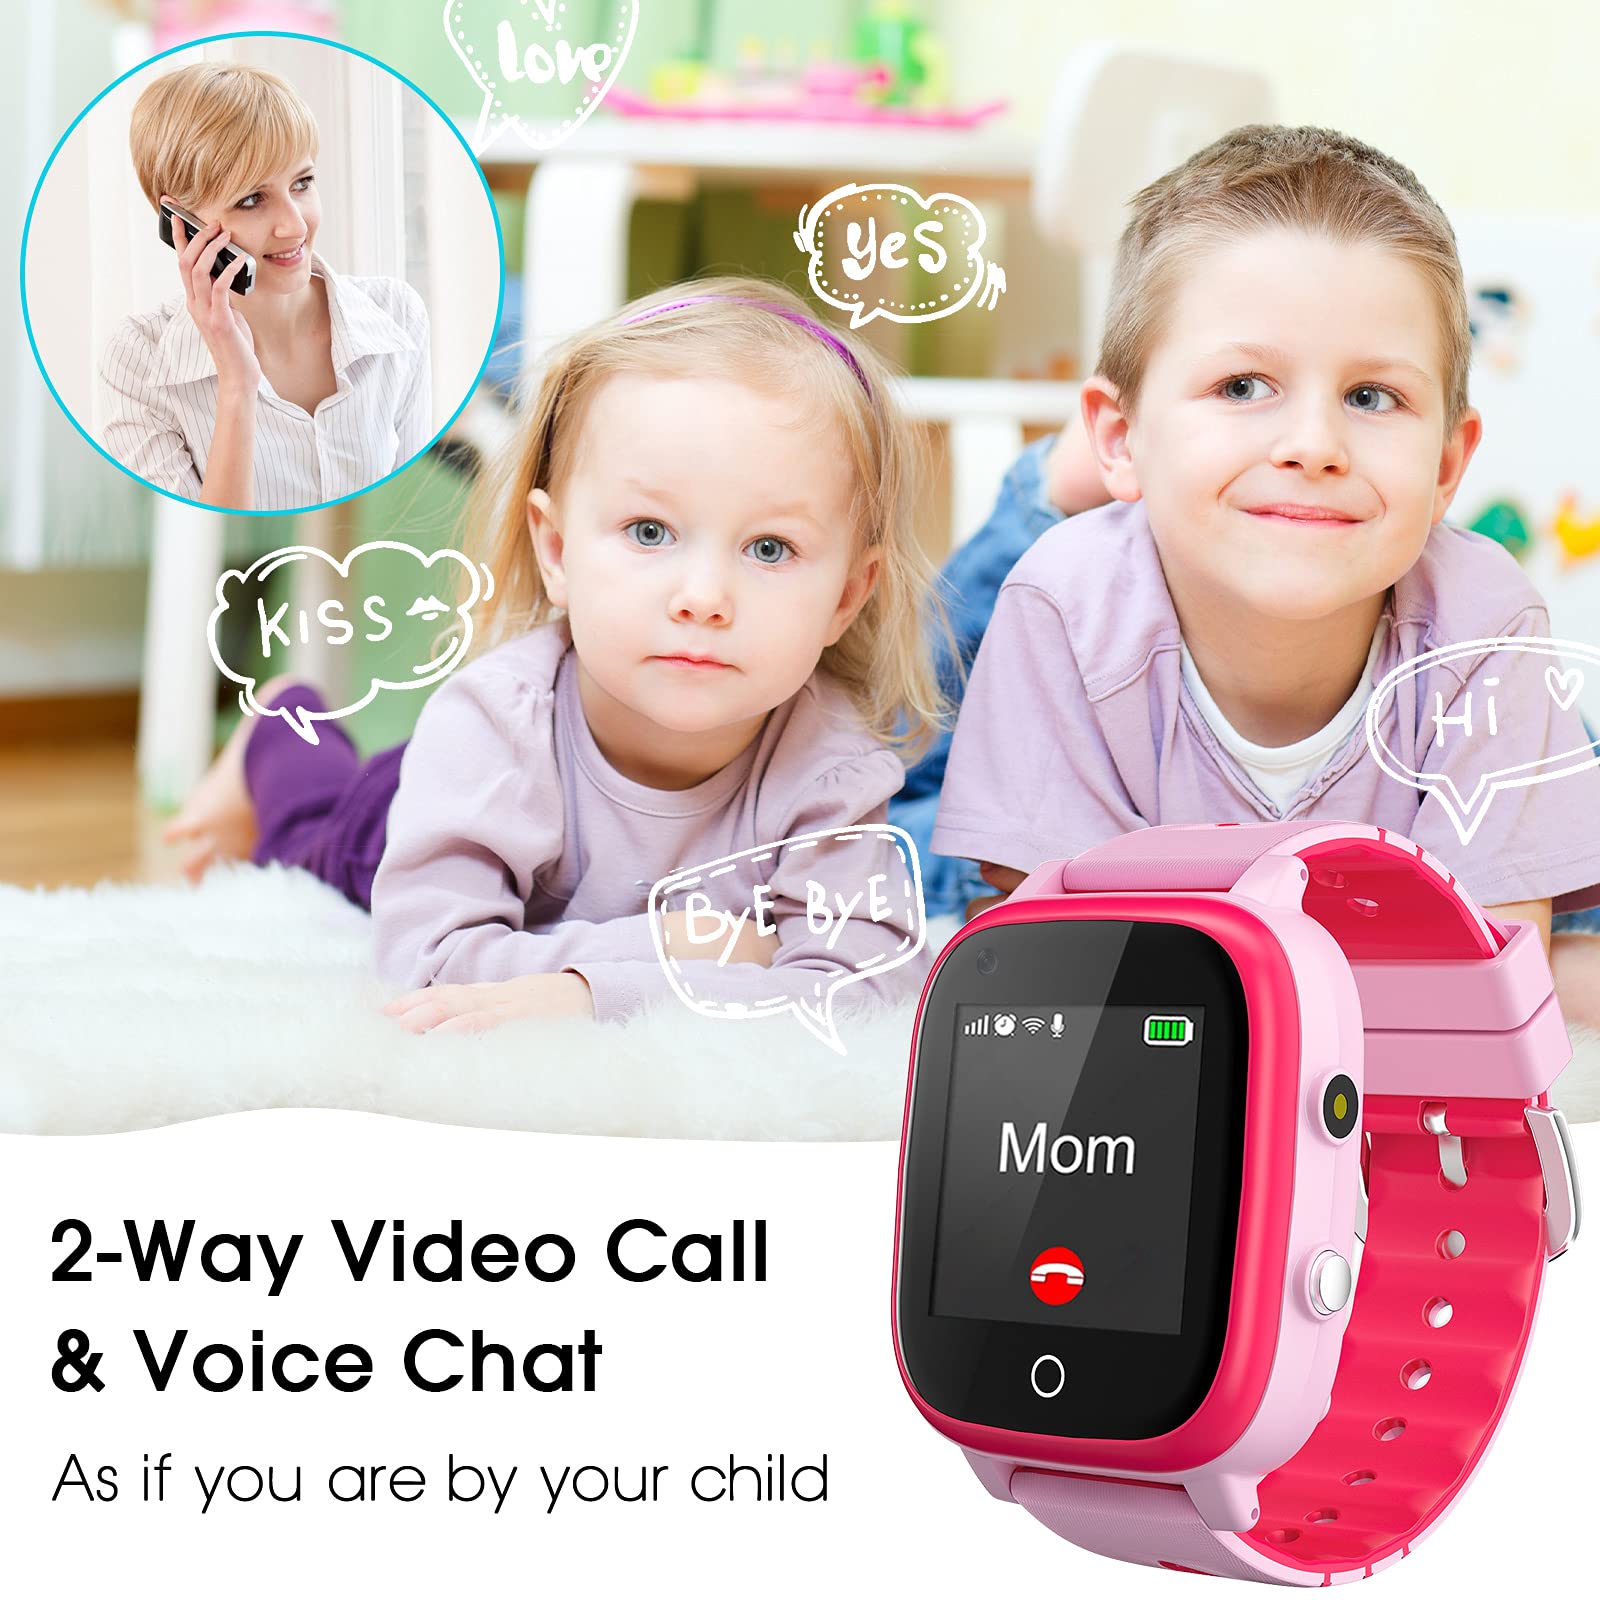 cjc 4G Kids Smart Watch, Smartwatch with GPS Tracker SOS Camera Voice & Video Call, HD Touch Screen Kid Watch Phone, Birthday for Age 3-15 Boys Girls (Red)